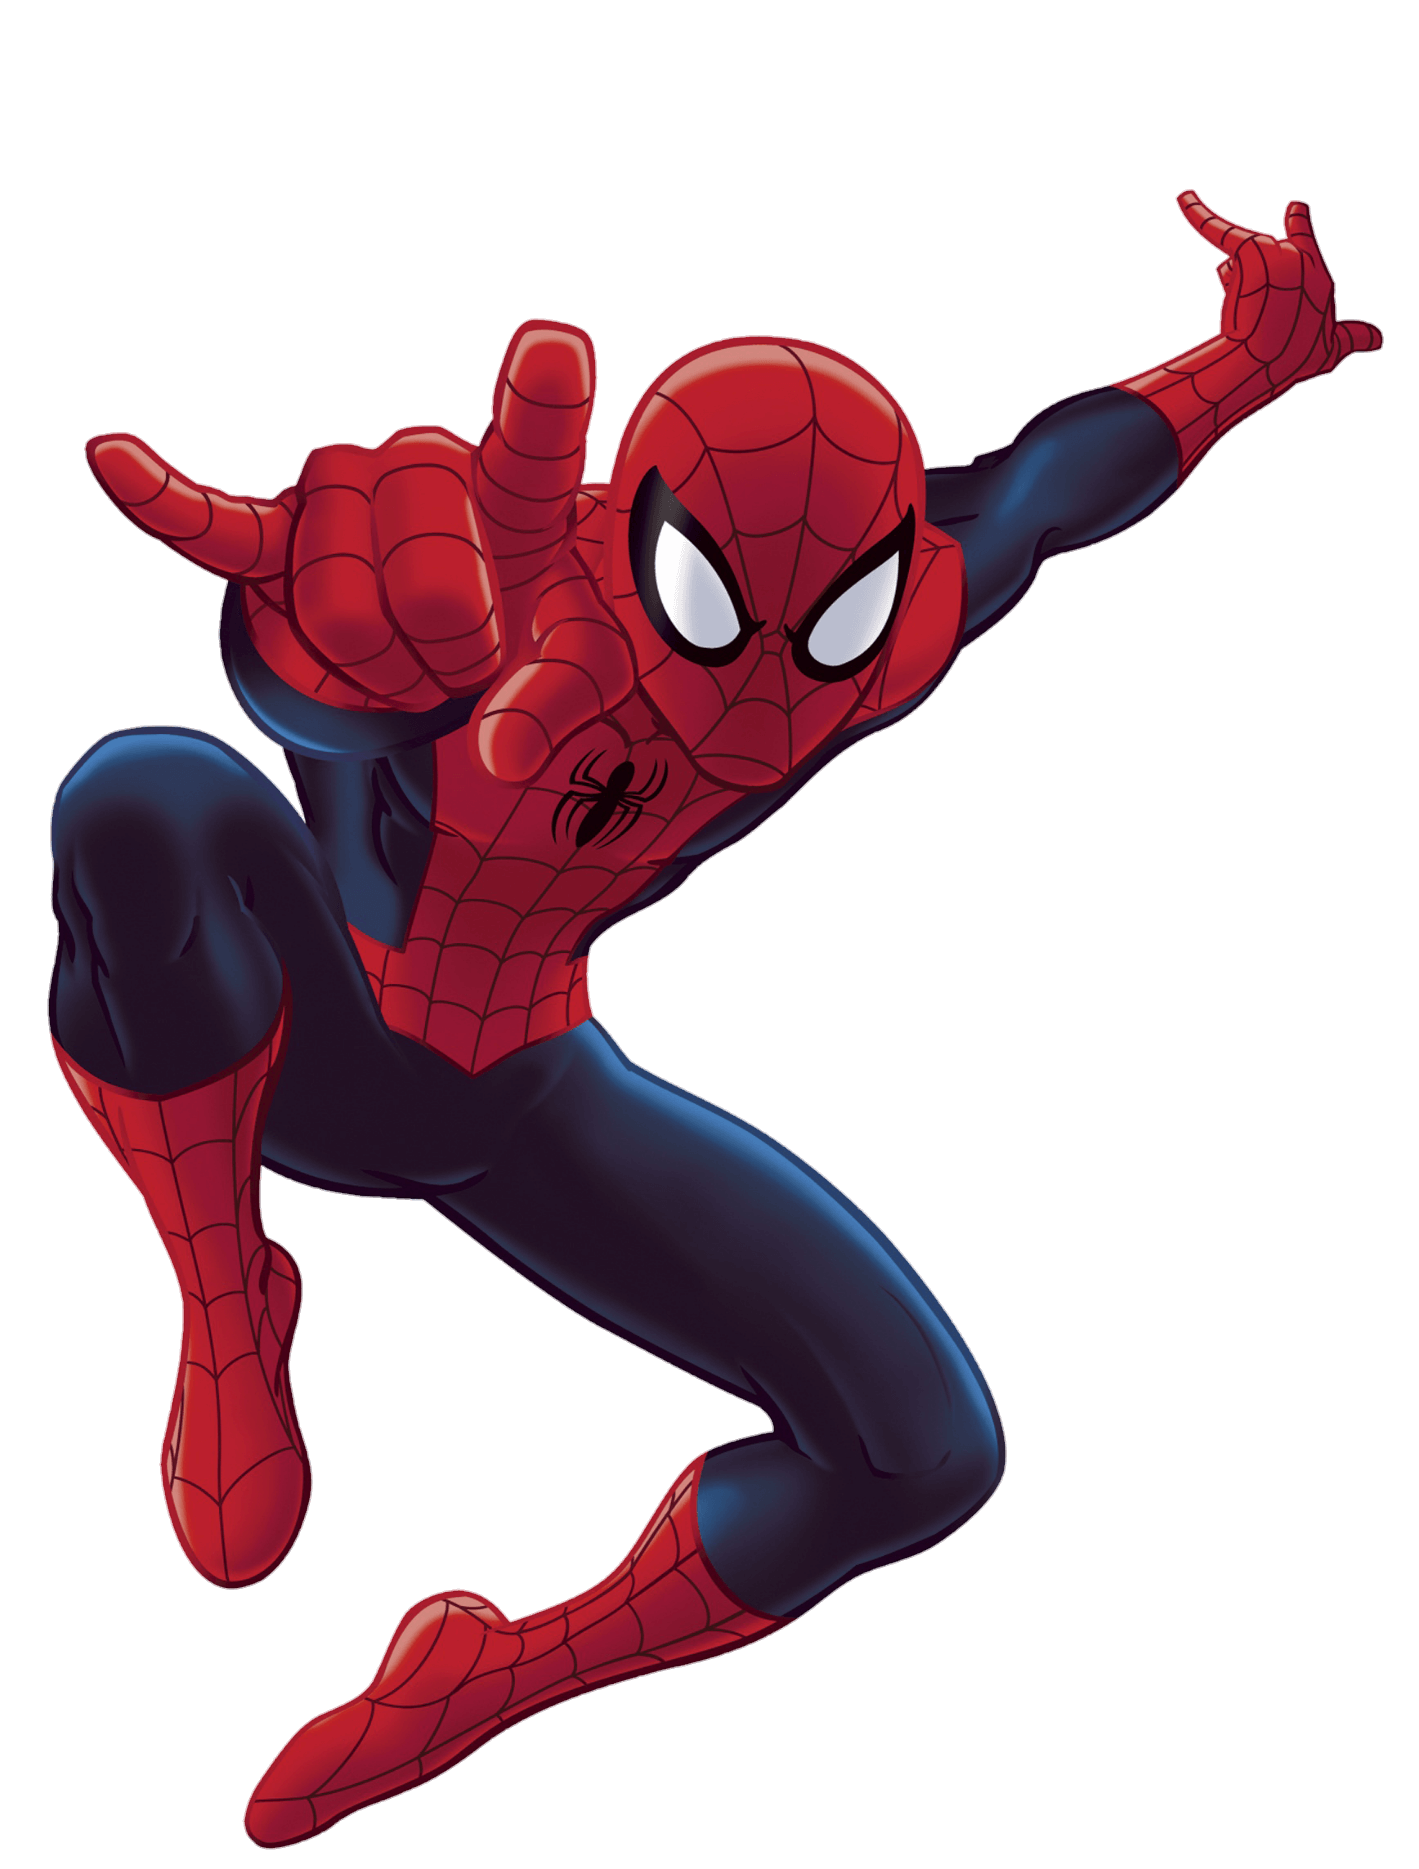 spider-man-png-from-pngfre-46